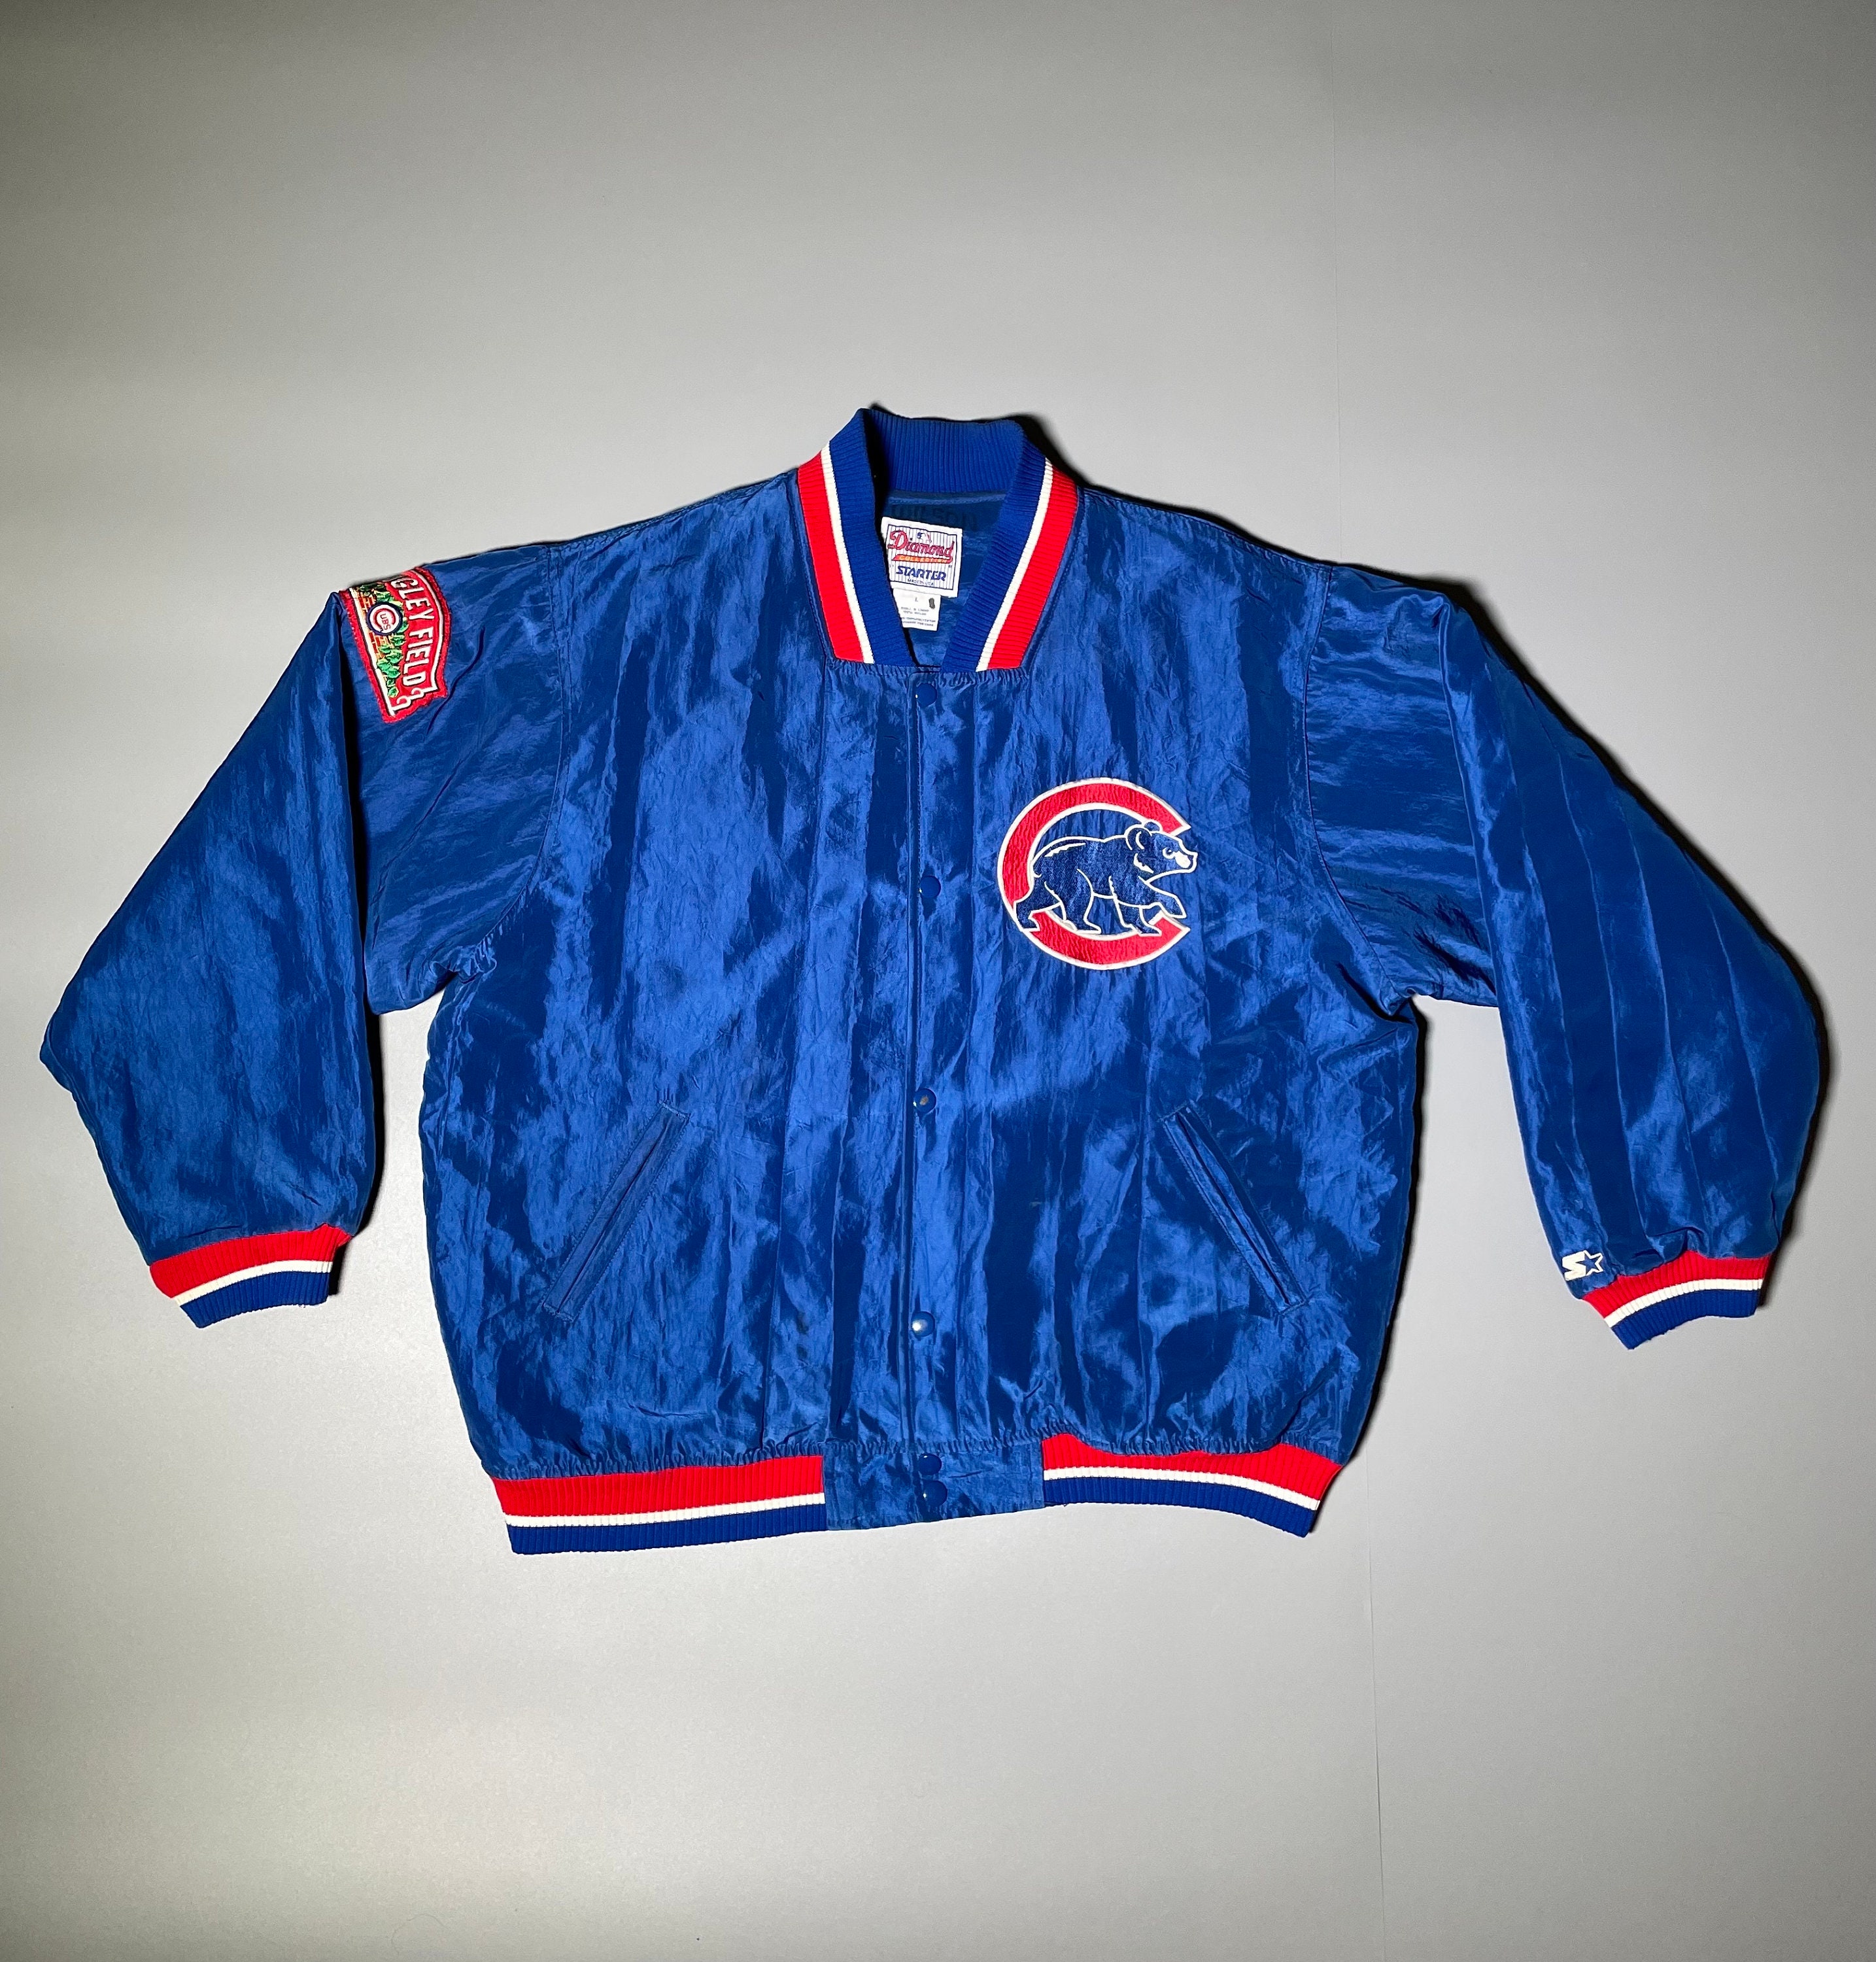 Authentic BP Jacket Chicago Cubs 1982